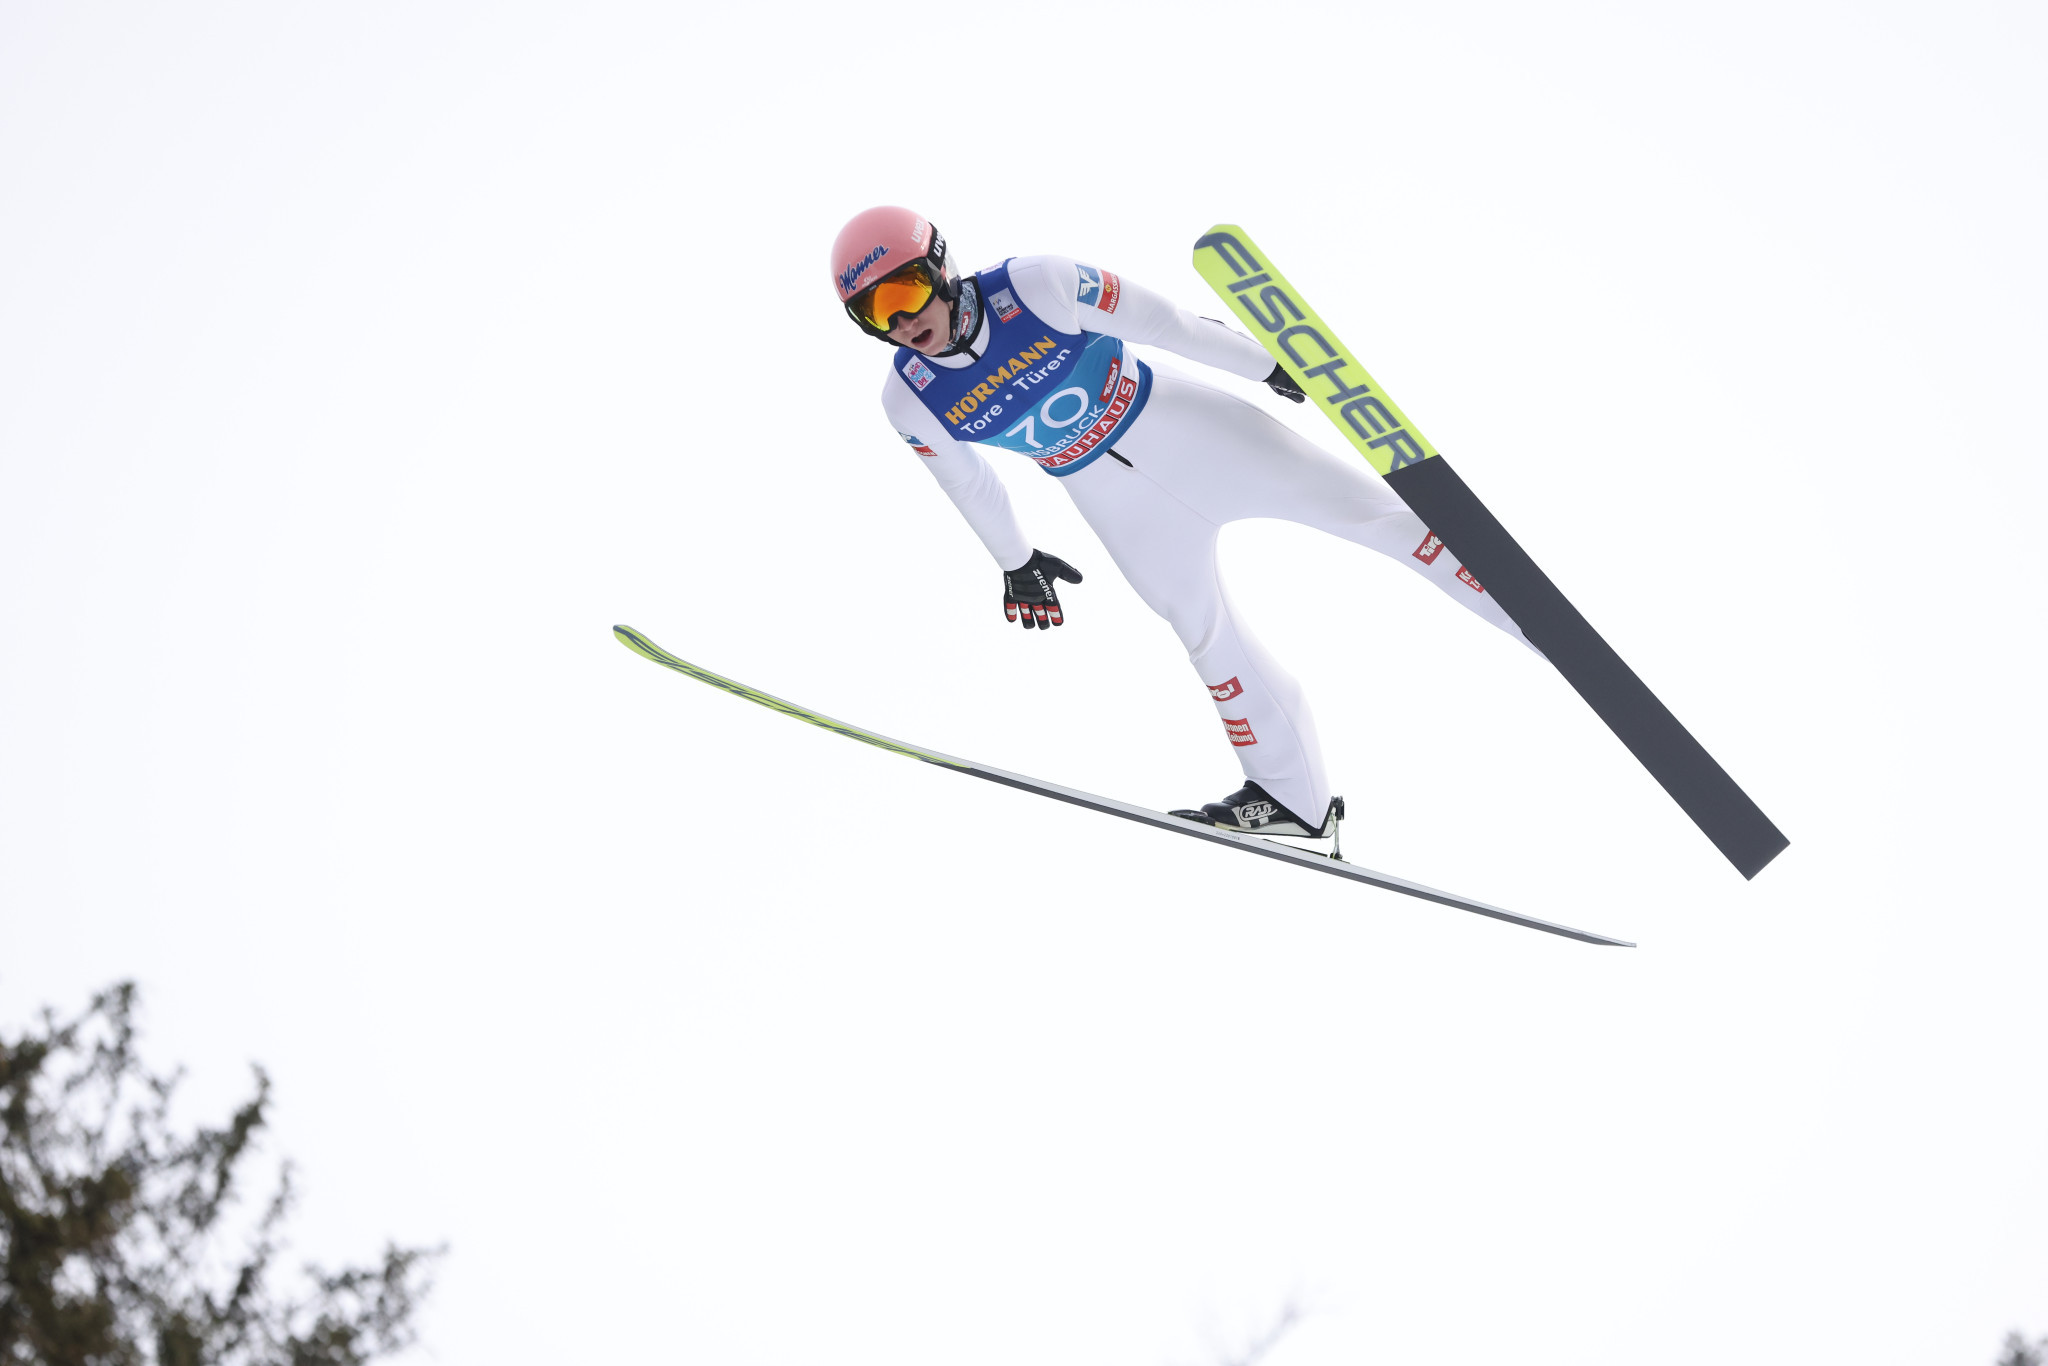 Austria's Jan Hörl placed second in qualification in Innsbruck ©Getty Images